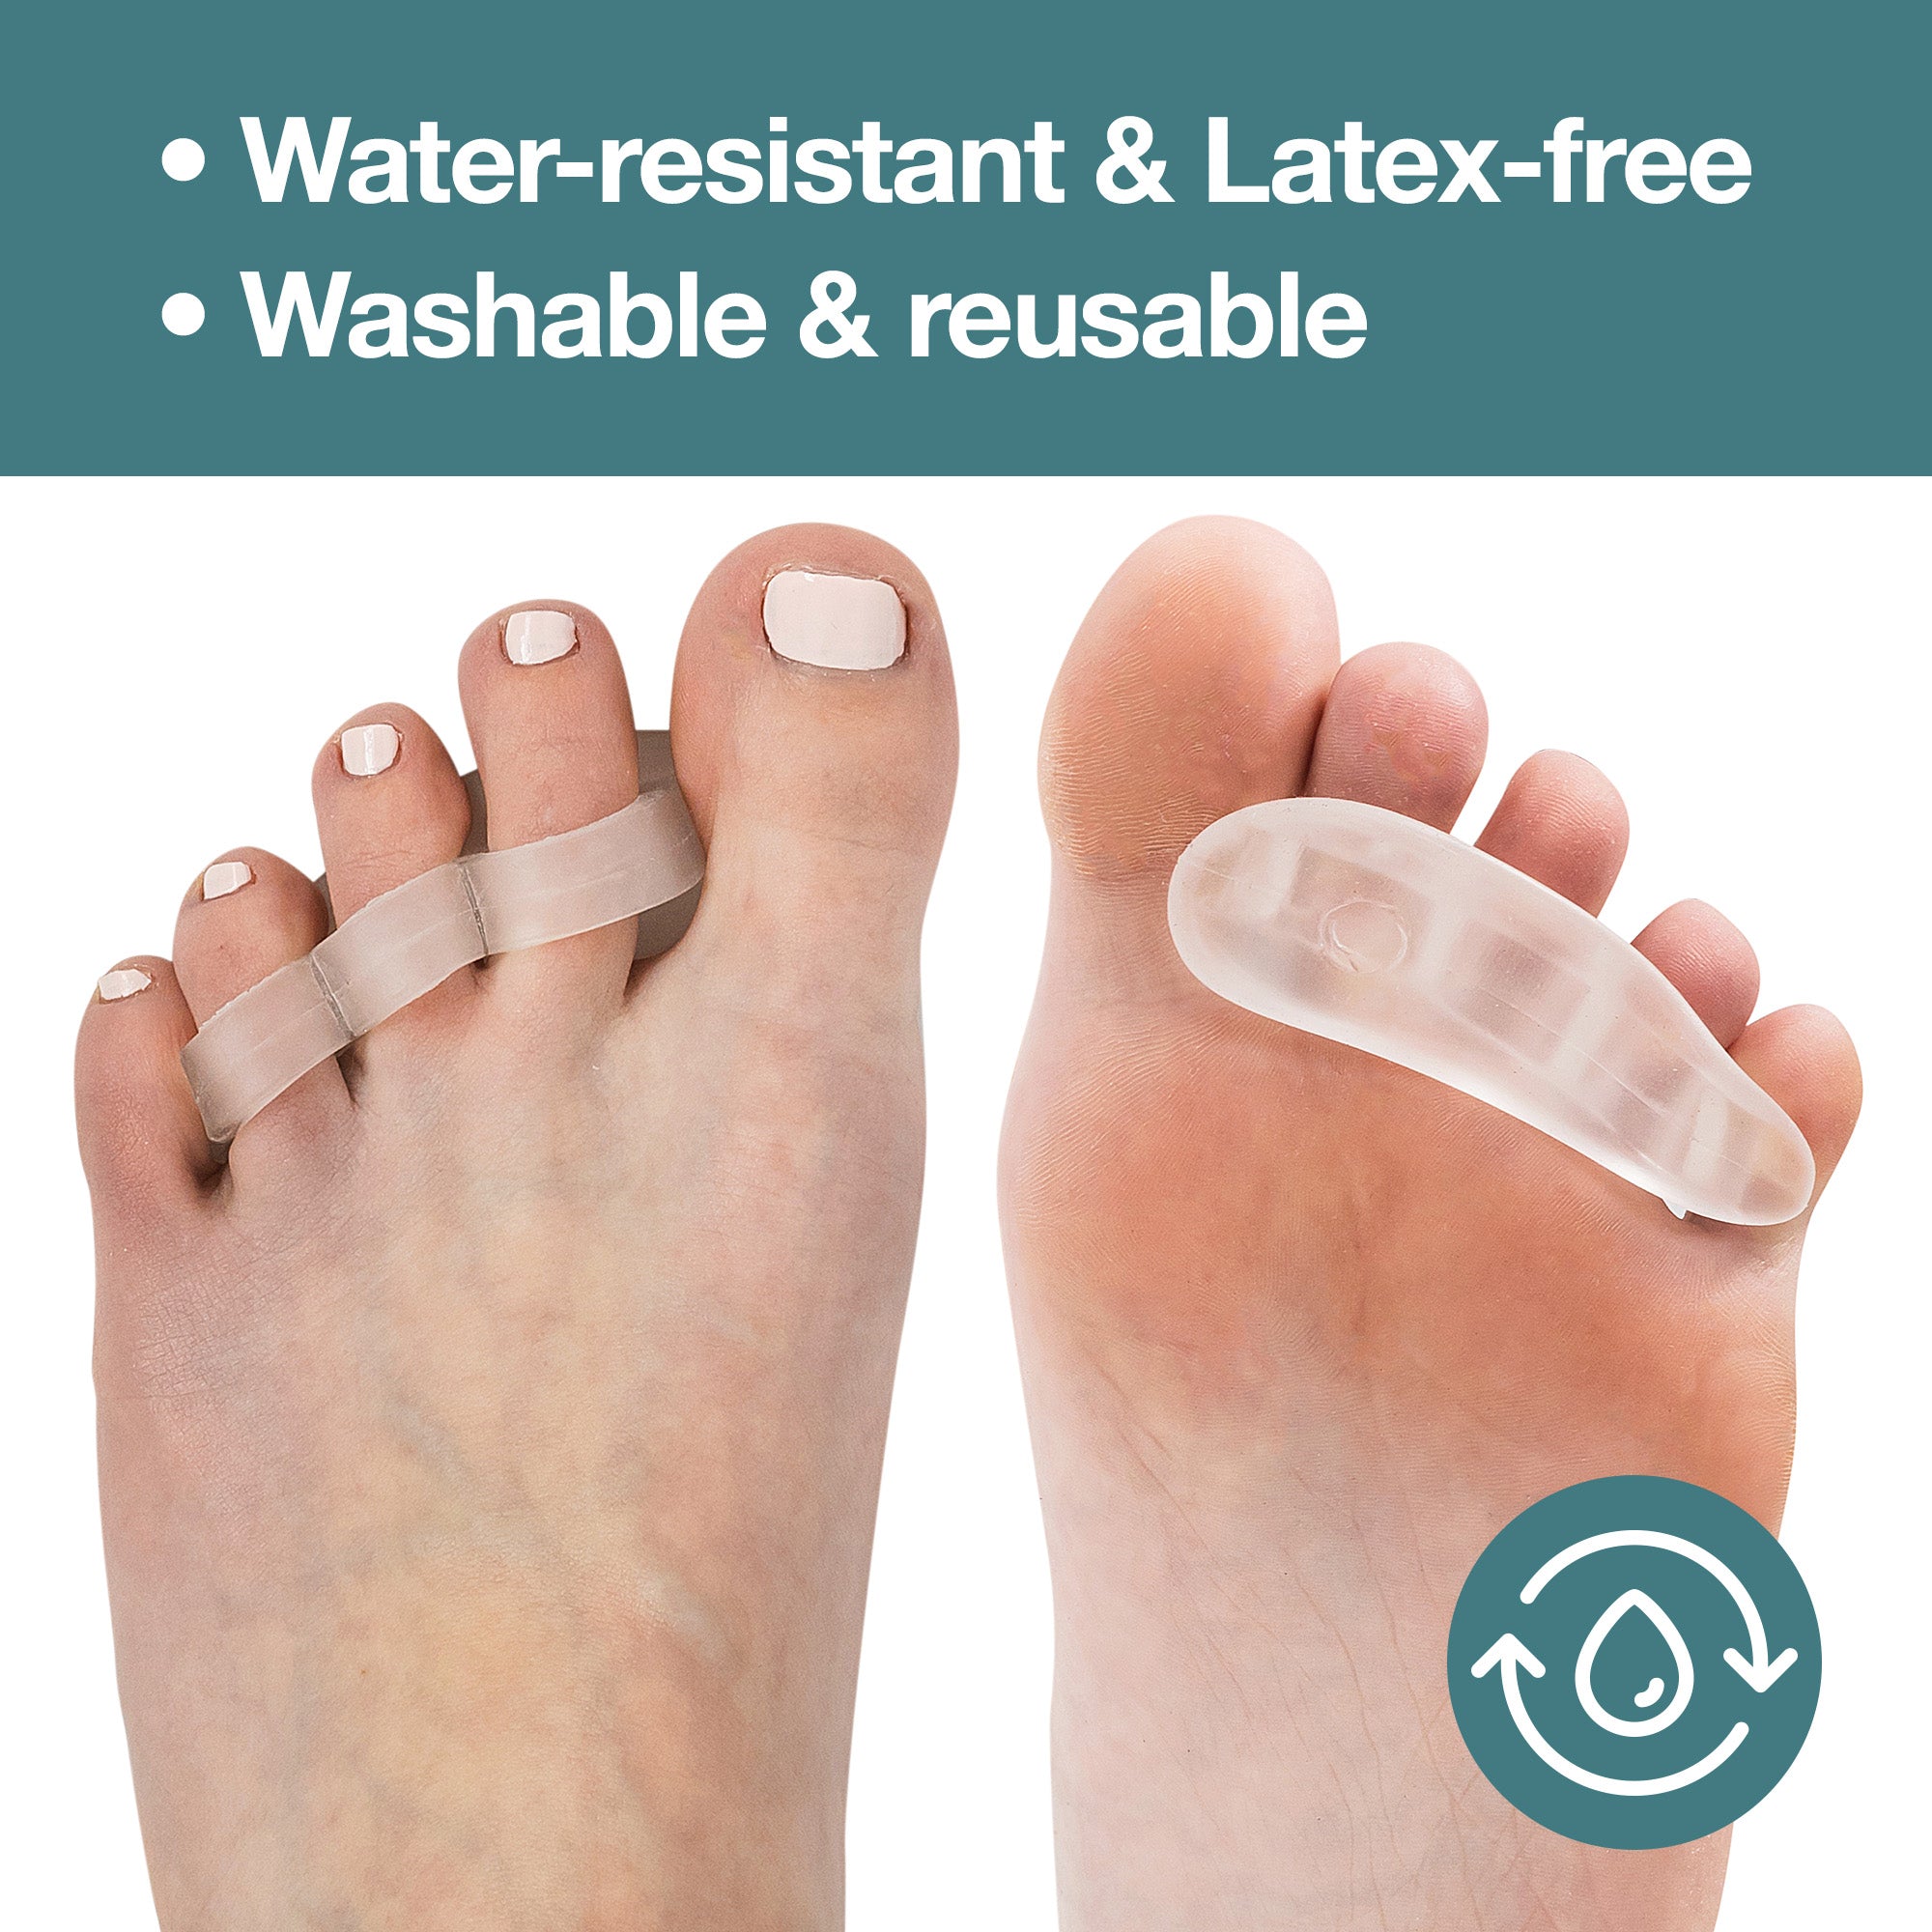 Hammer Toe Straightener - Hammer Toe Corrector for Women and Men - Gel Toe  Separators for Overlapping Toes - Hammer Toe Splint Cushion to Correct Toes